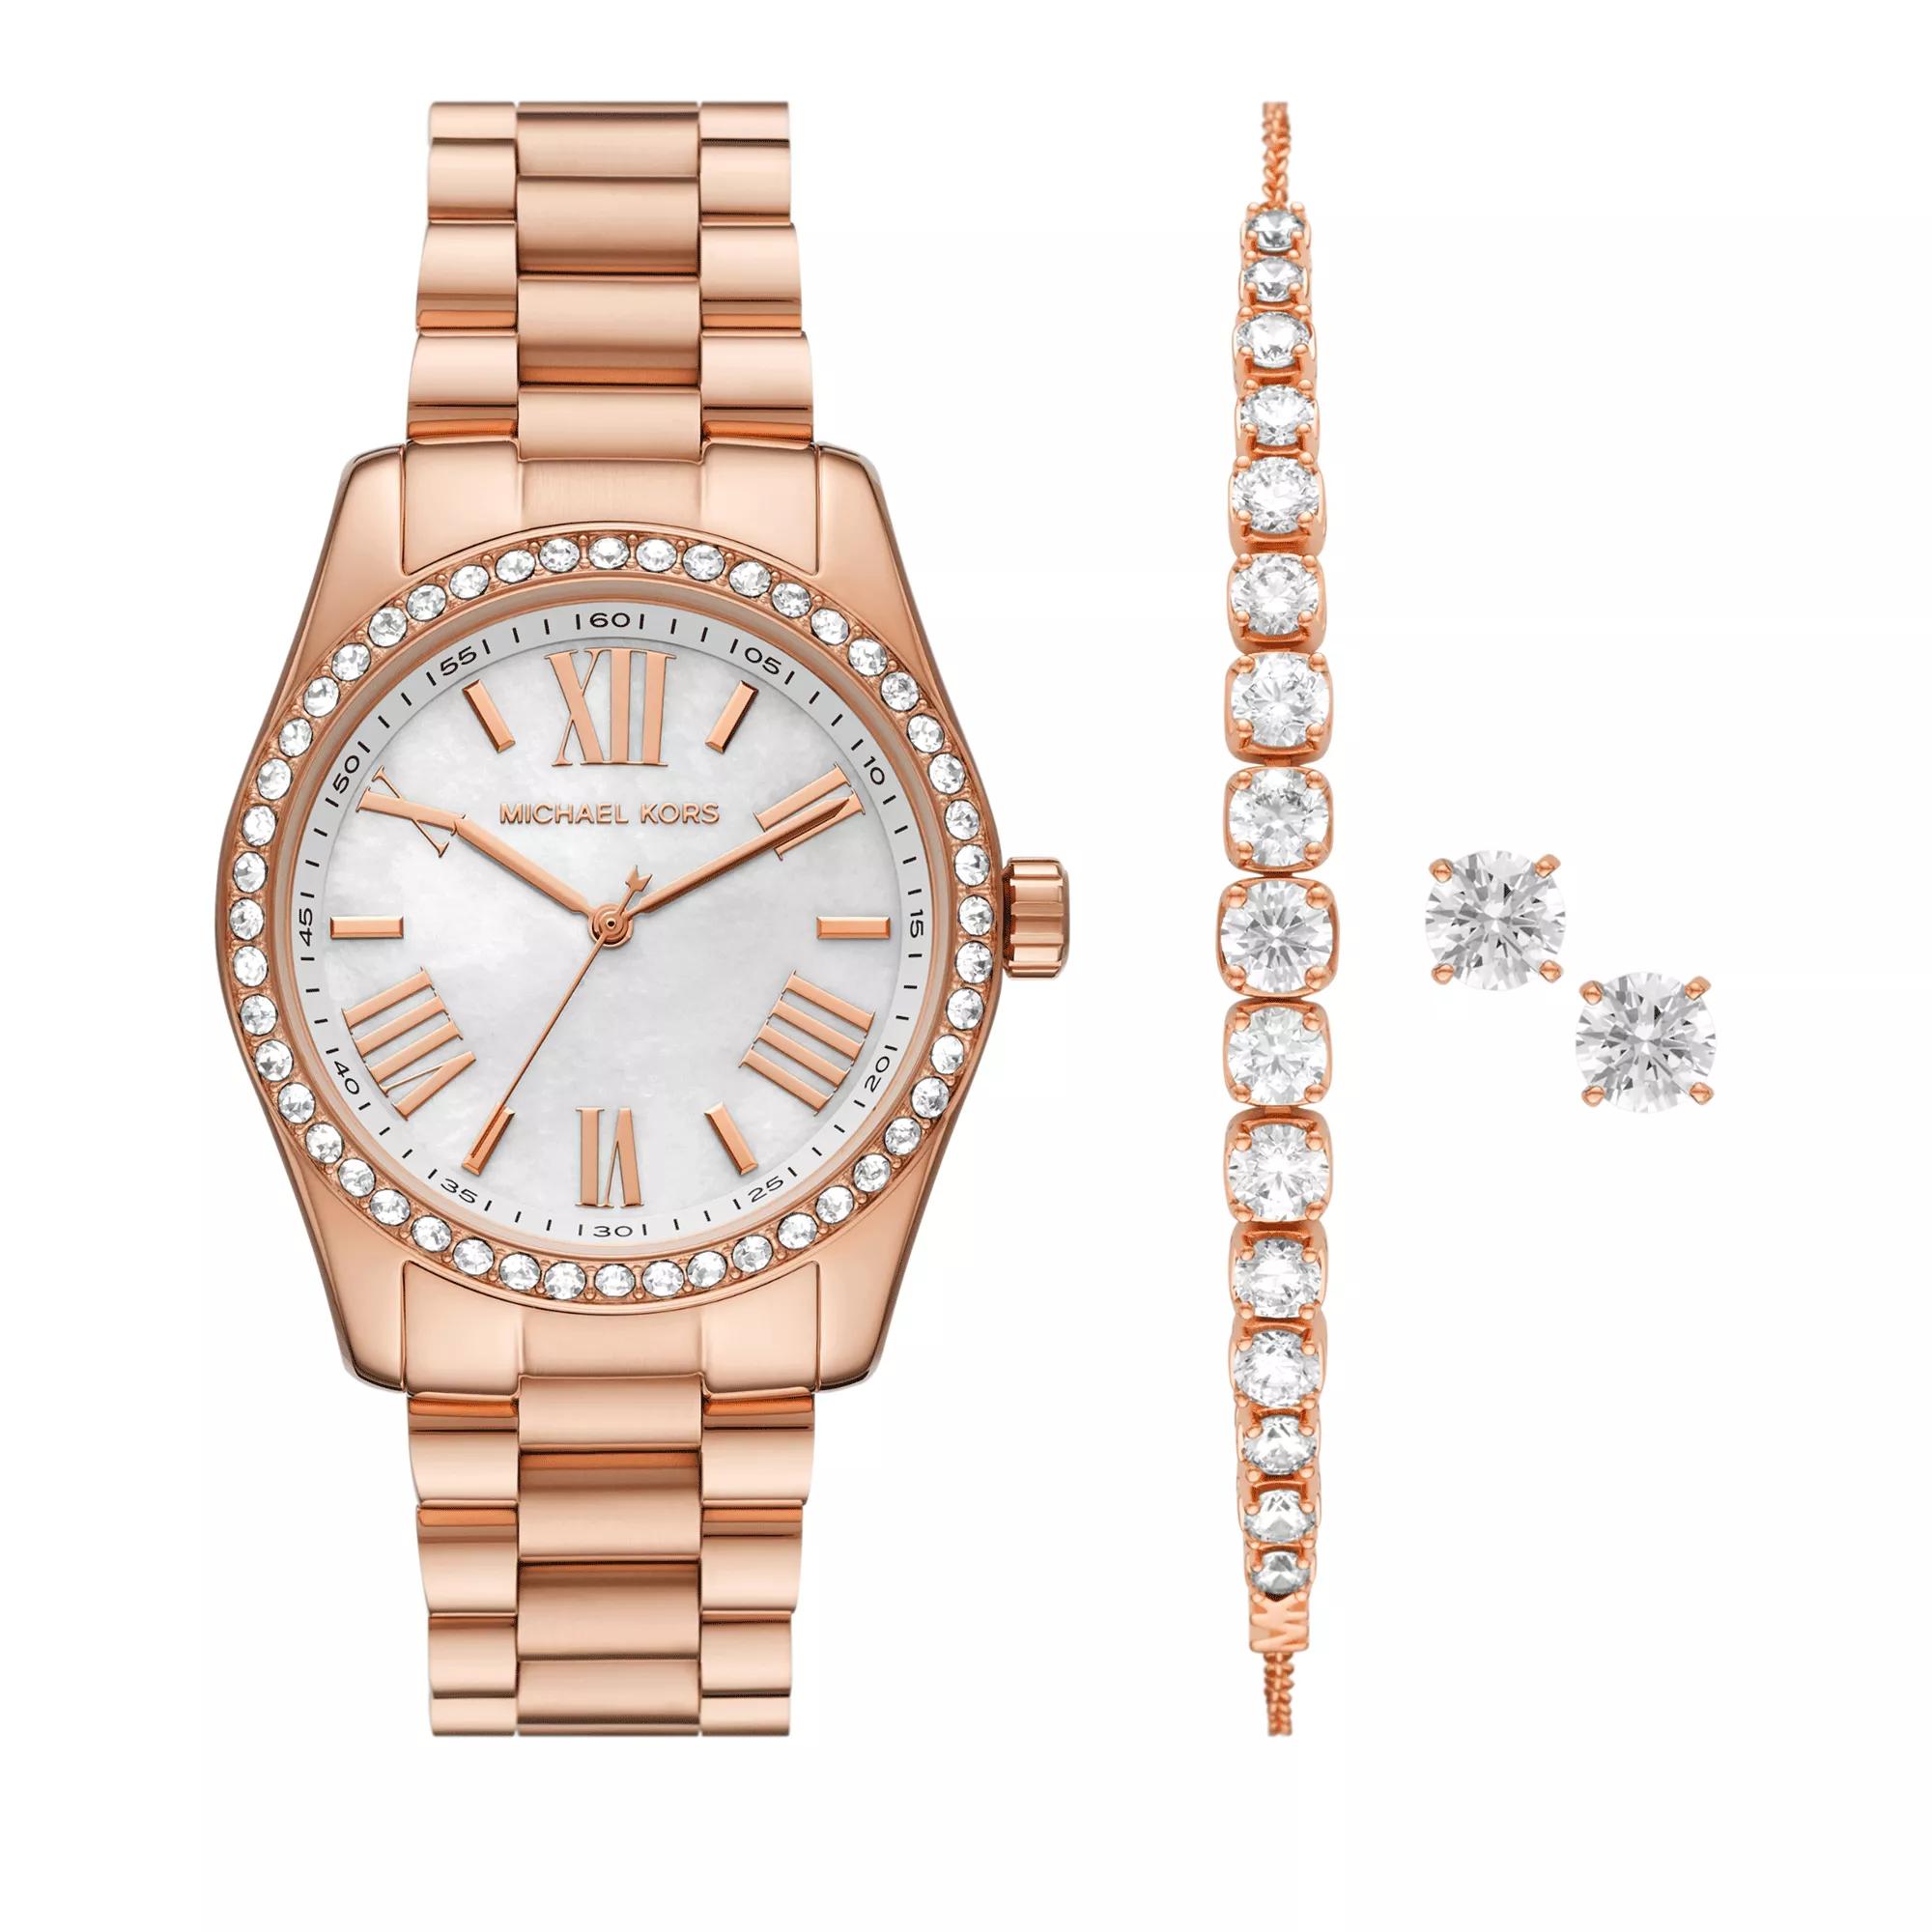 Michael Kors Lexington Quarz-Uhr Steel | Jewellery Watch Gold Three-Hand Rose Stainless and